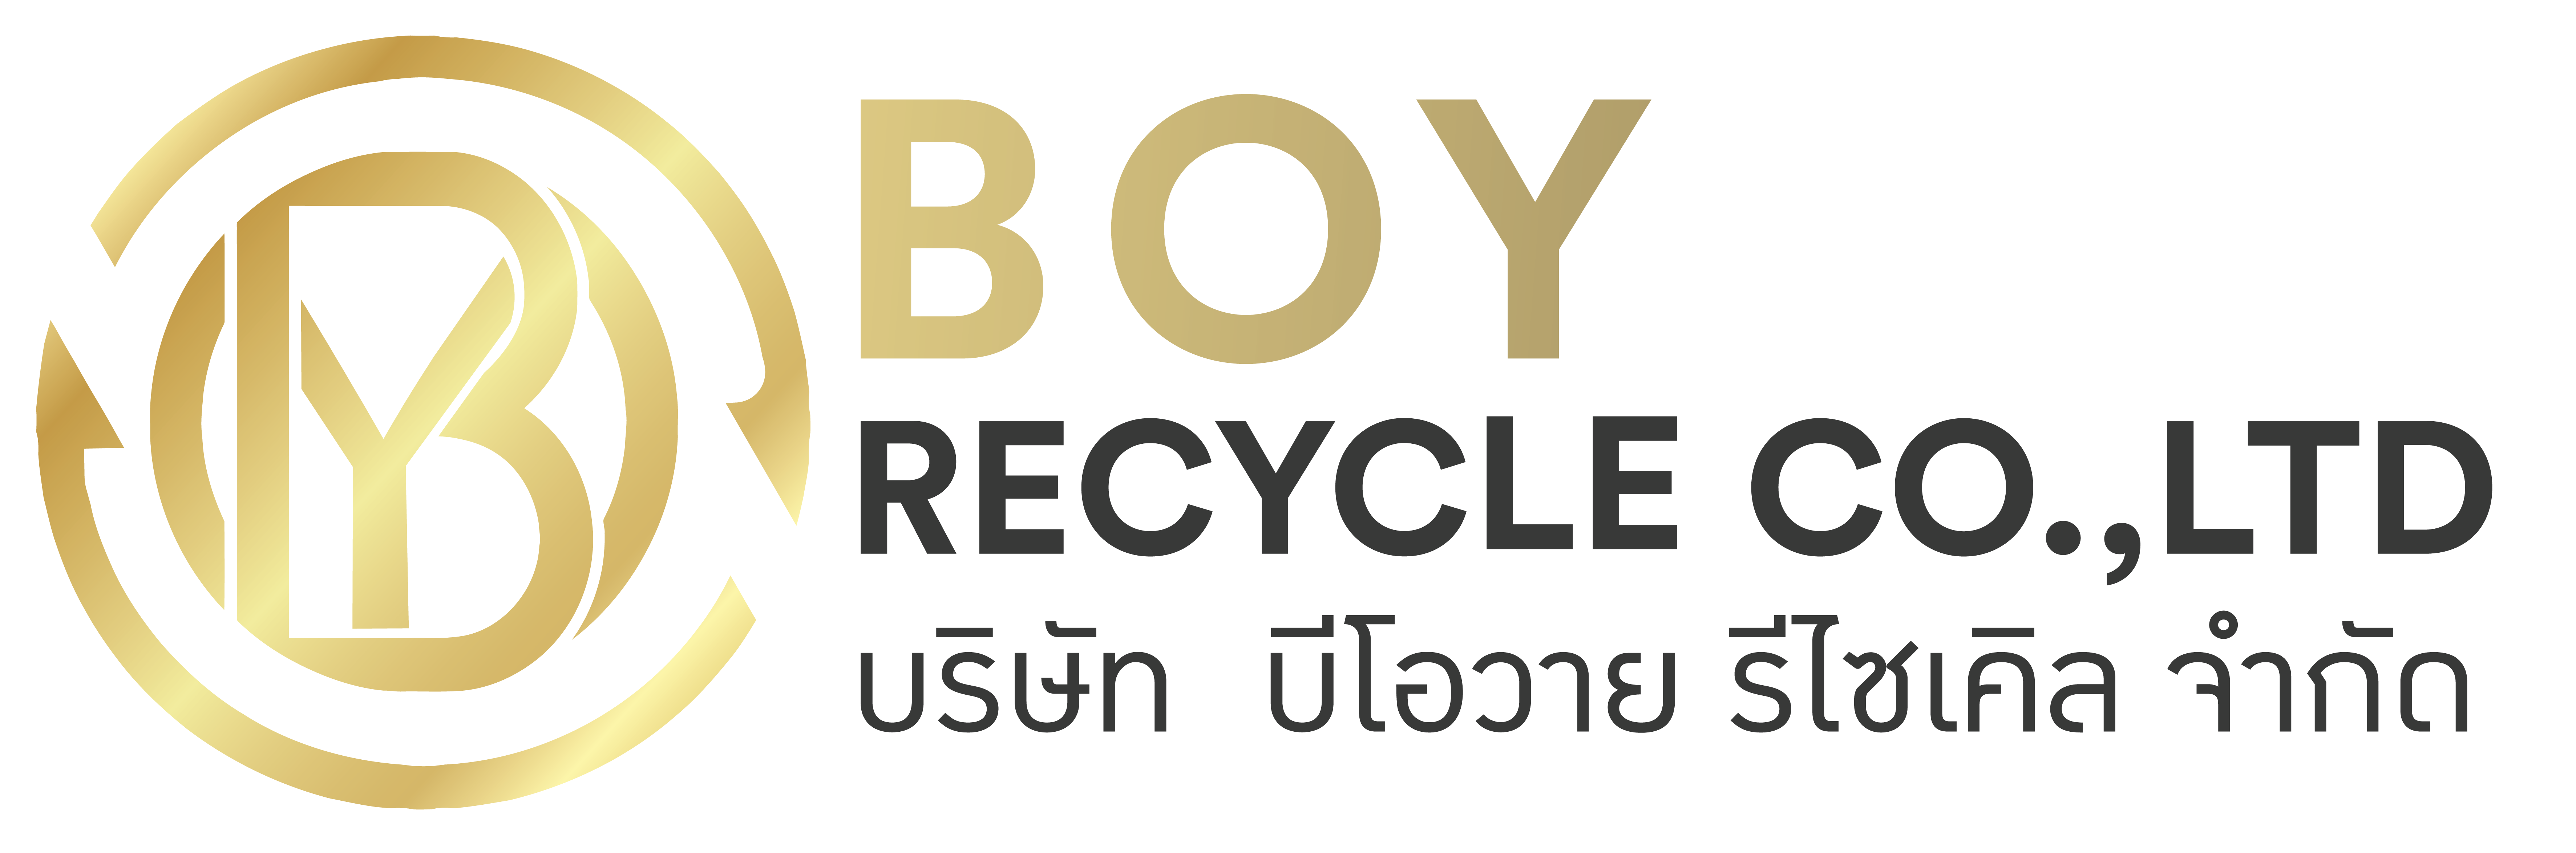 Boy Recycle